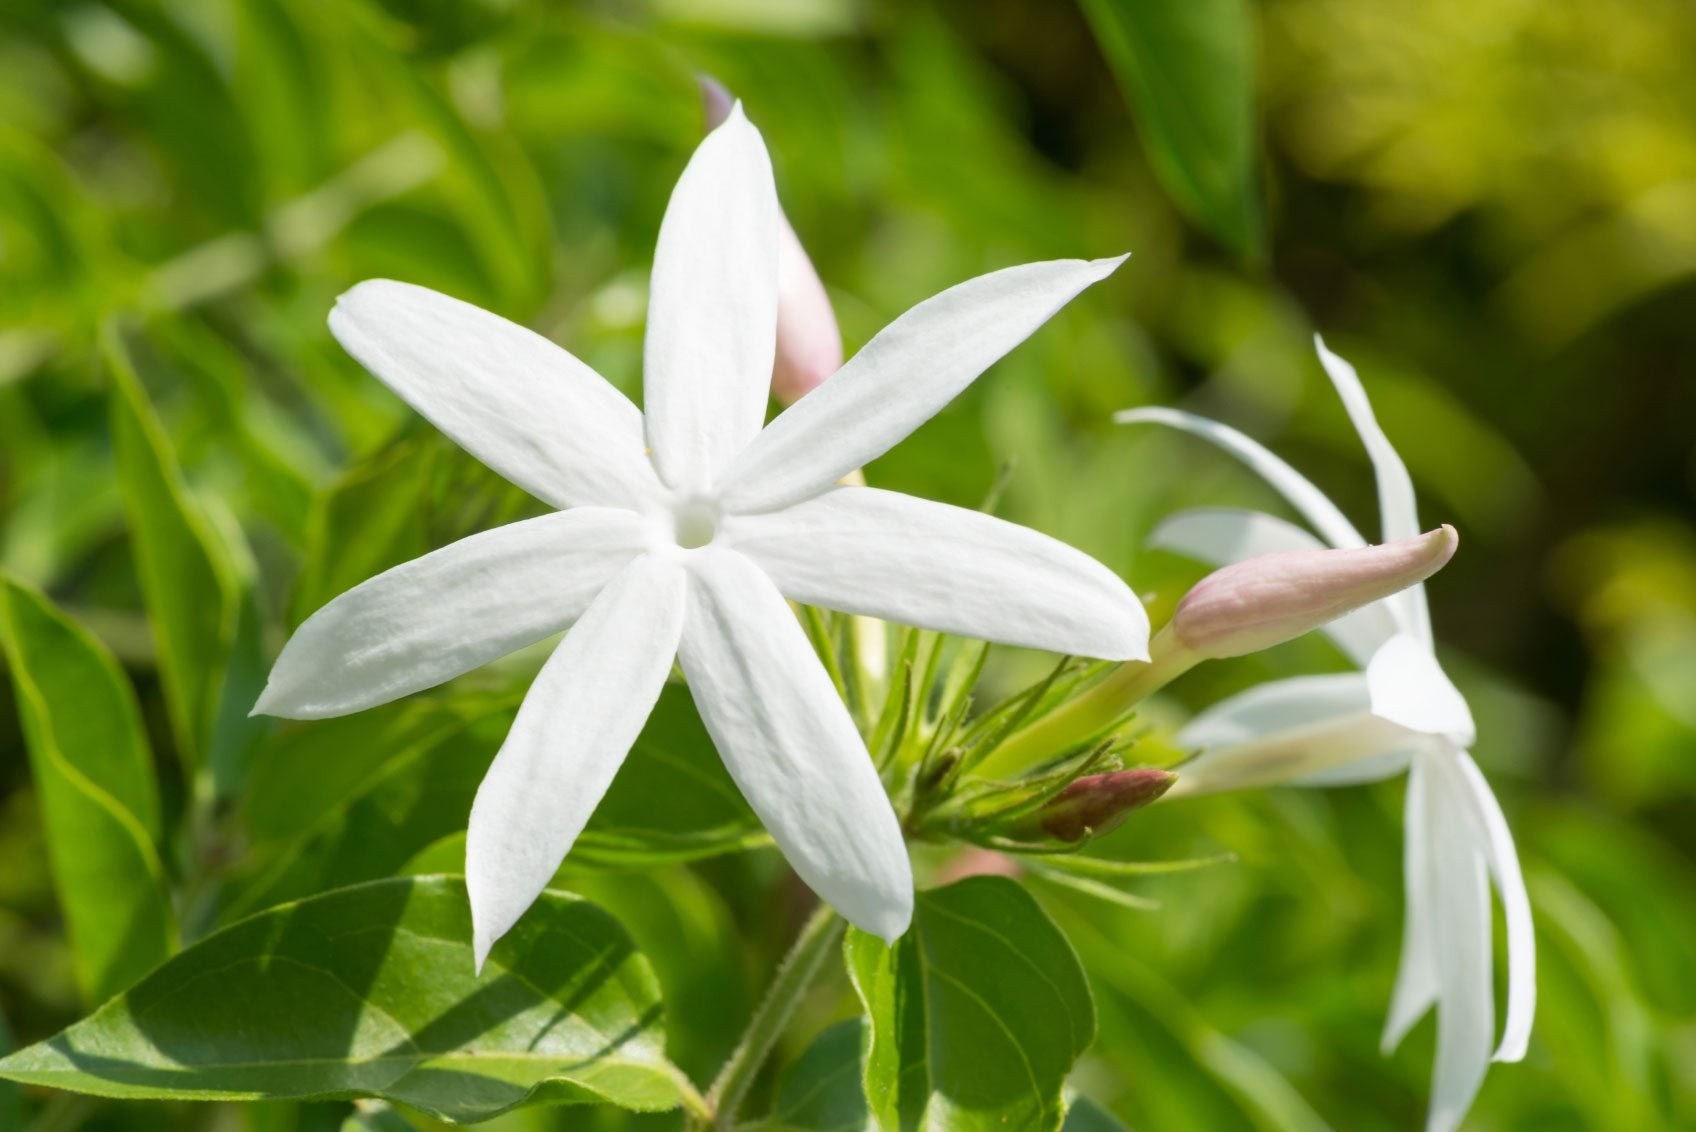 Common Jasmine Varieties - What Are Some Different Types Of